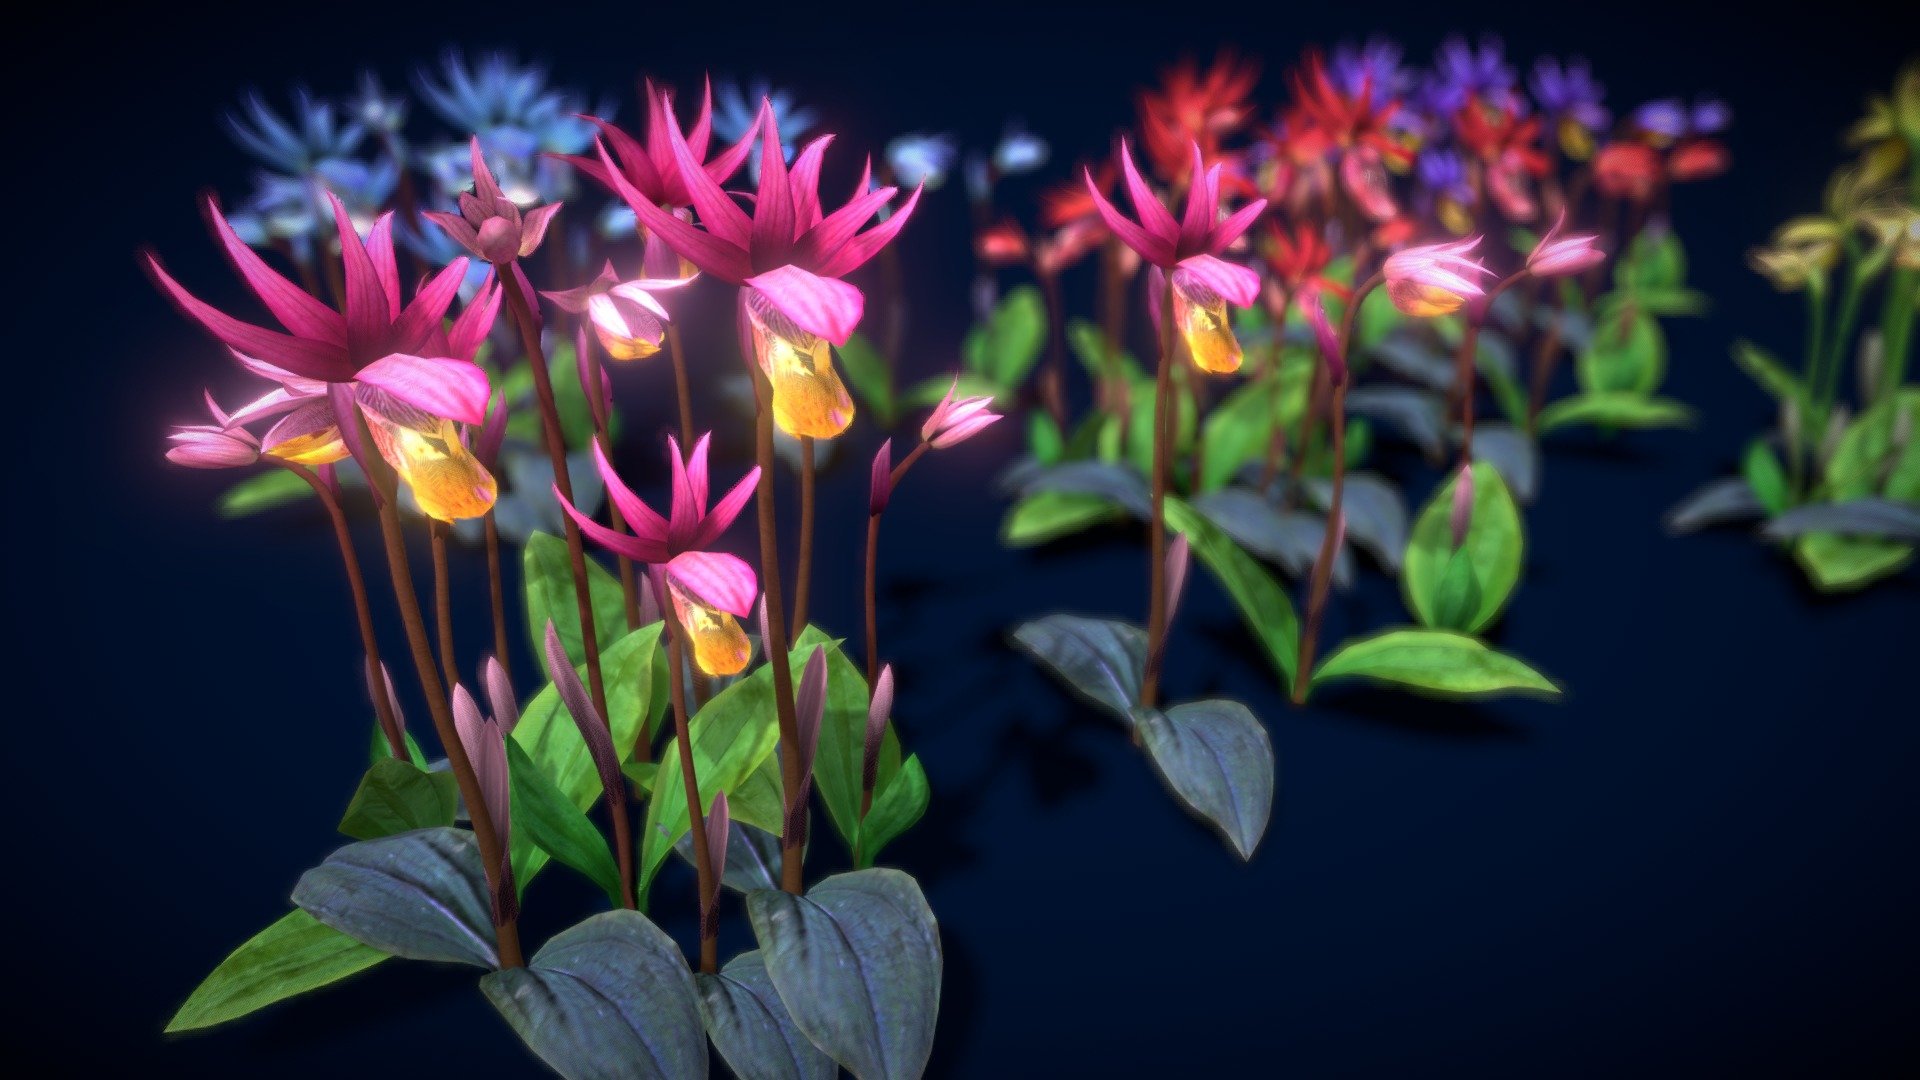 HIGH QUALITY Flower optimized for Unity game engine! 
Mobile Optimize Scene This is model 3D Flower Calypso Bulbosa in the Big Pack (Cartoon Flower Colections) with over 5 types color!
All objects are ready to use in your visualizations. 
-1024x1024, texture maps
-Poly Count : Average 20556polys /20353 verts/38097 Tris - Flower Calypso Bulbosa - Buy Royalty Free 3D model by vustudios 3d model